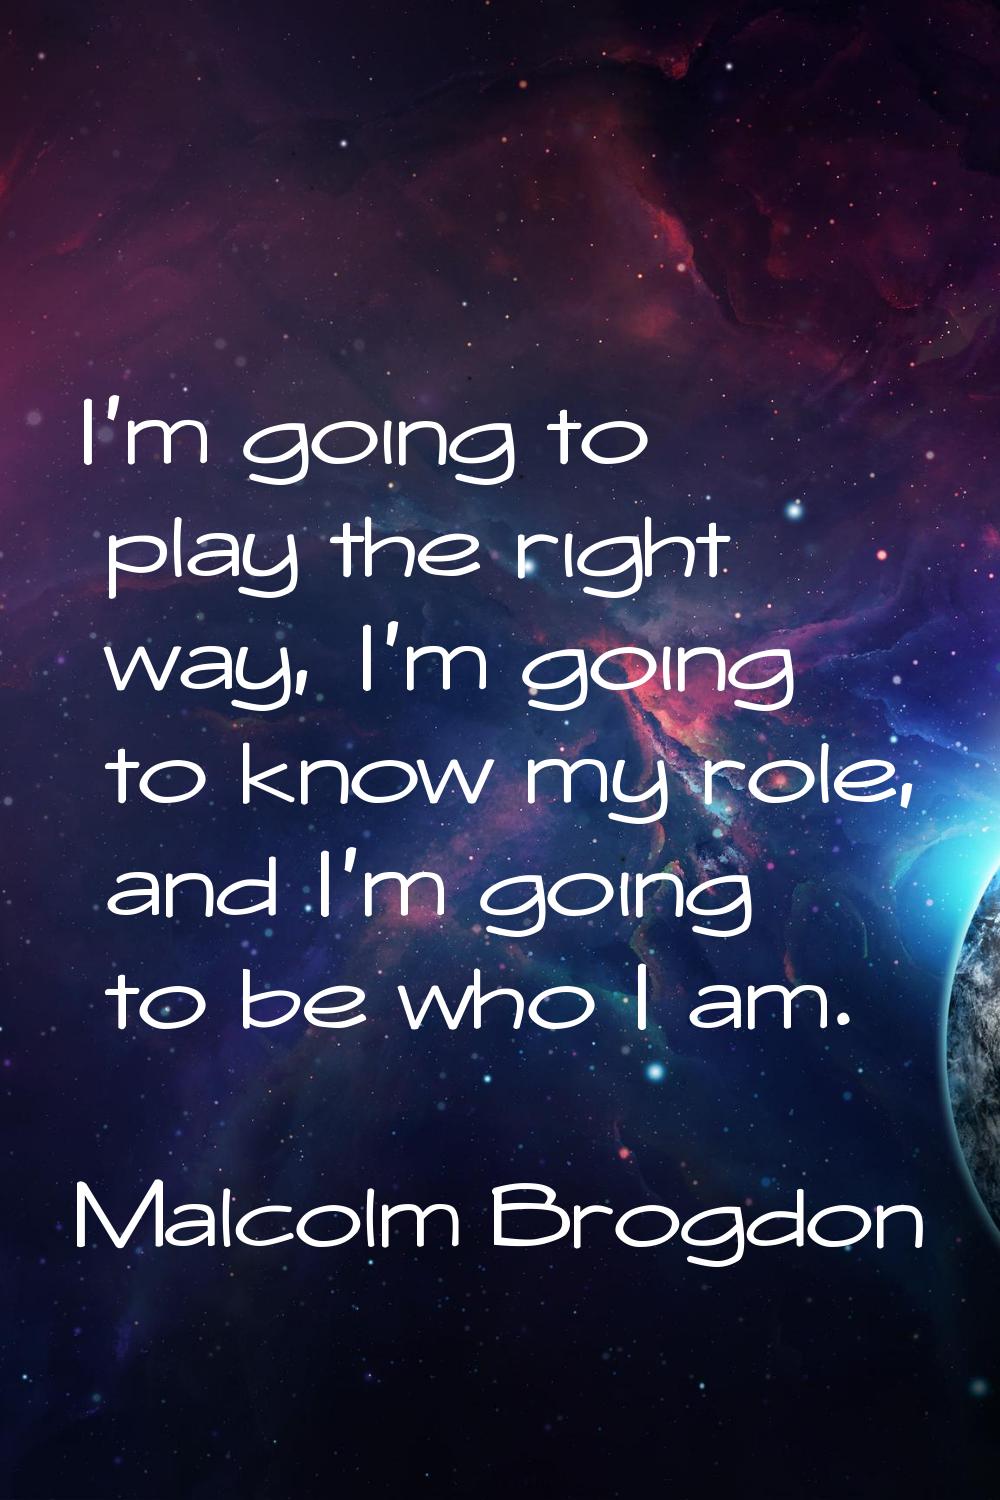 I'm going to play the right way, I'm going to know my role, and I'm going to be who I am.